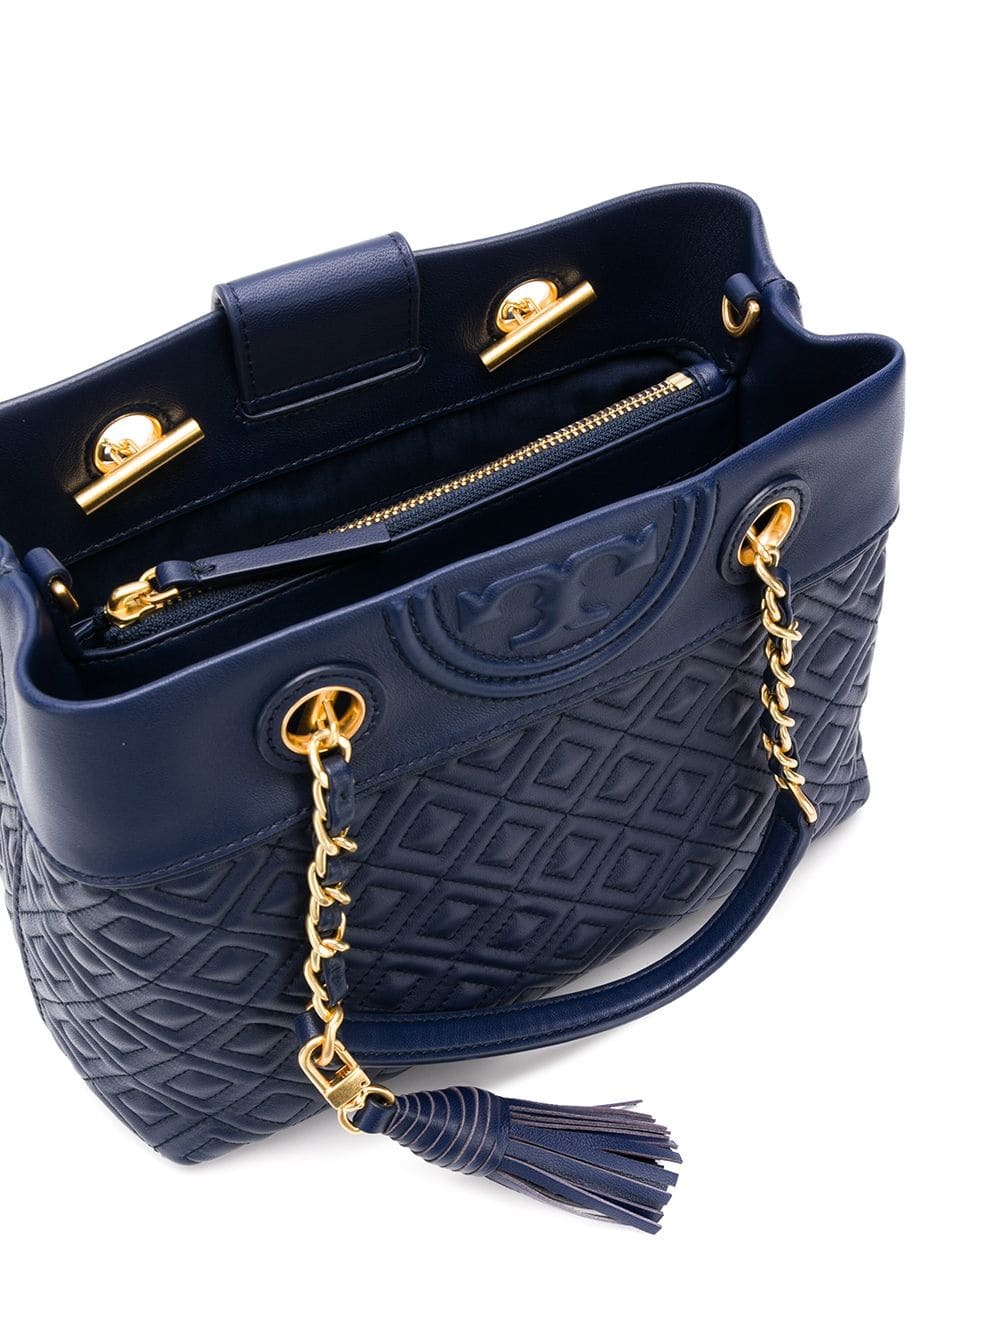 Tory Burch Fleming Small Tote, $722  | Lookastic